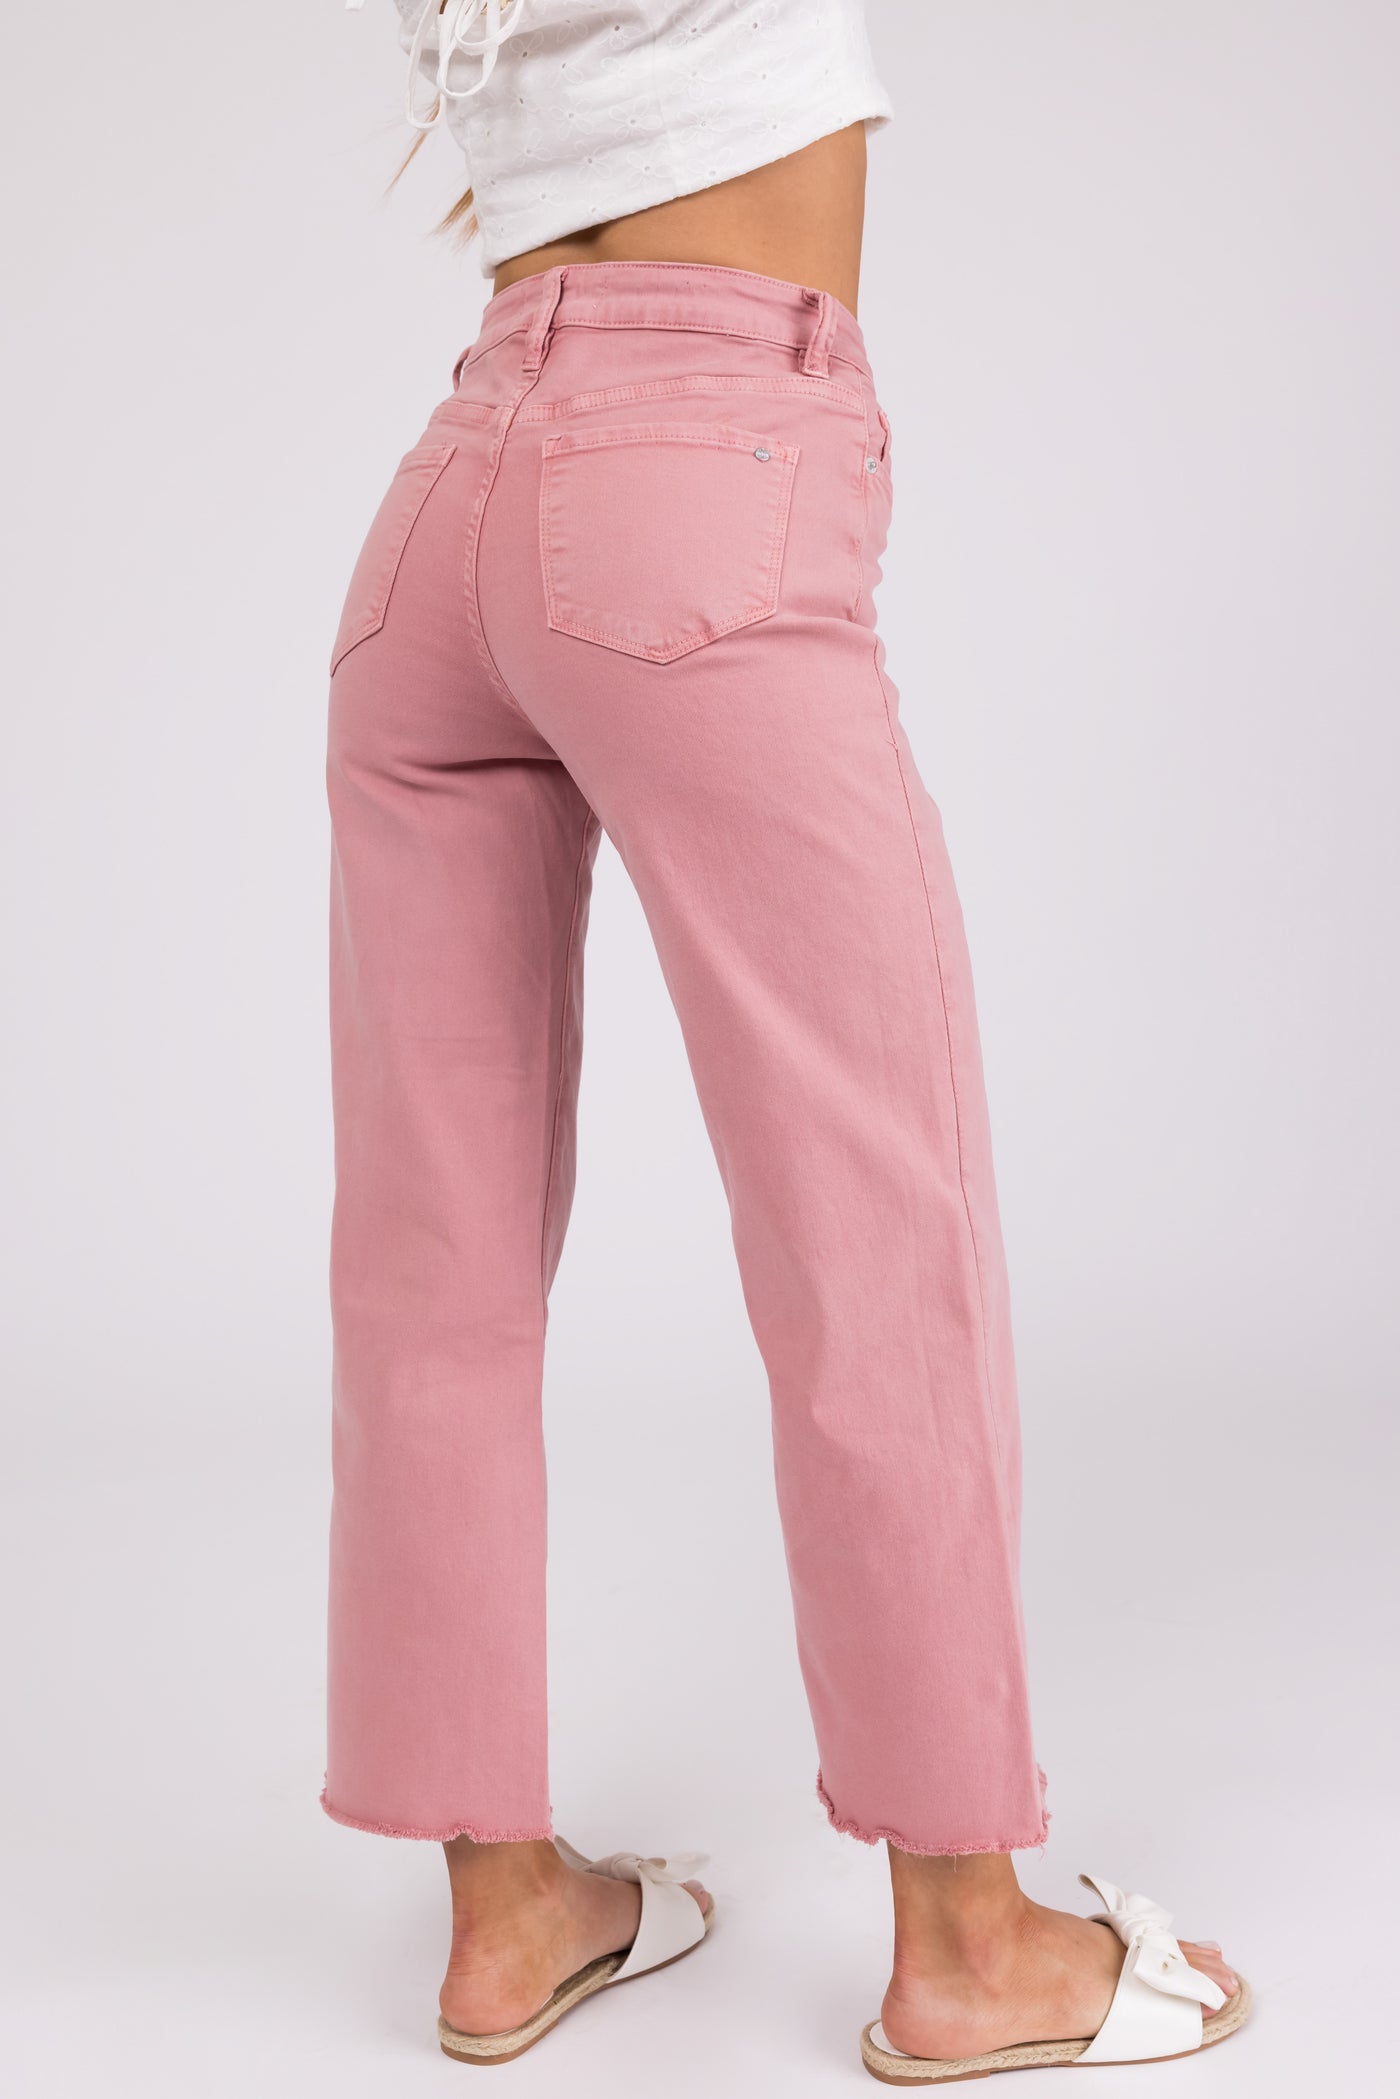 Mica Denim Baby Pink Wide Leg Button Fly Jeans